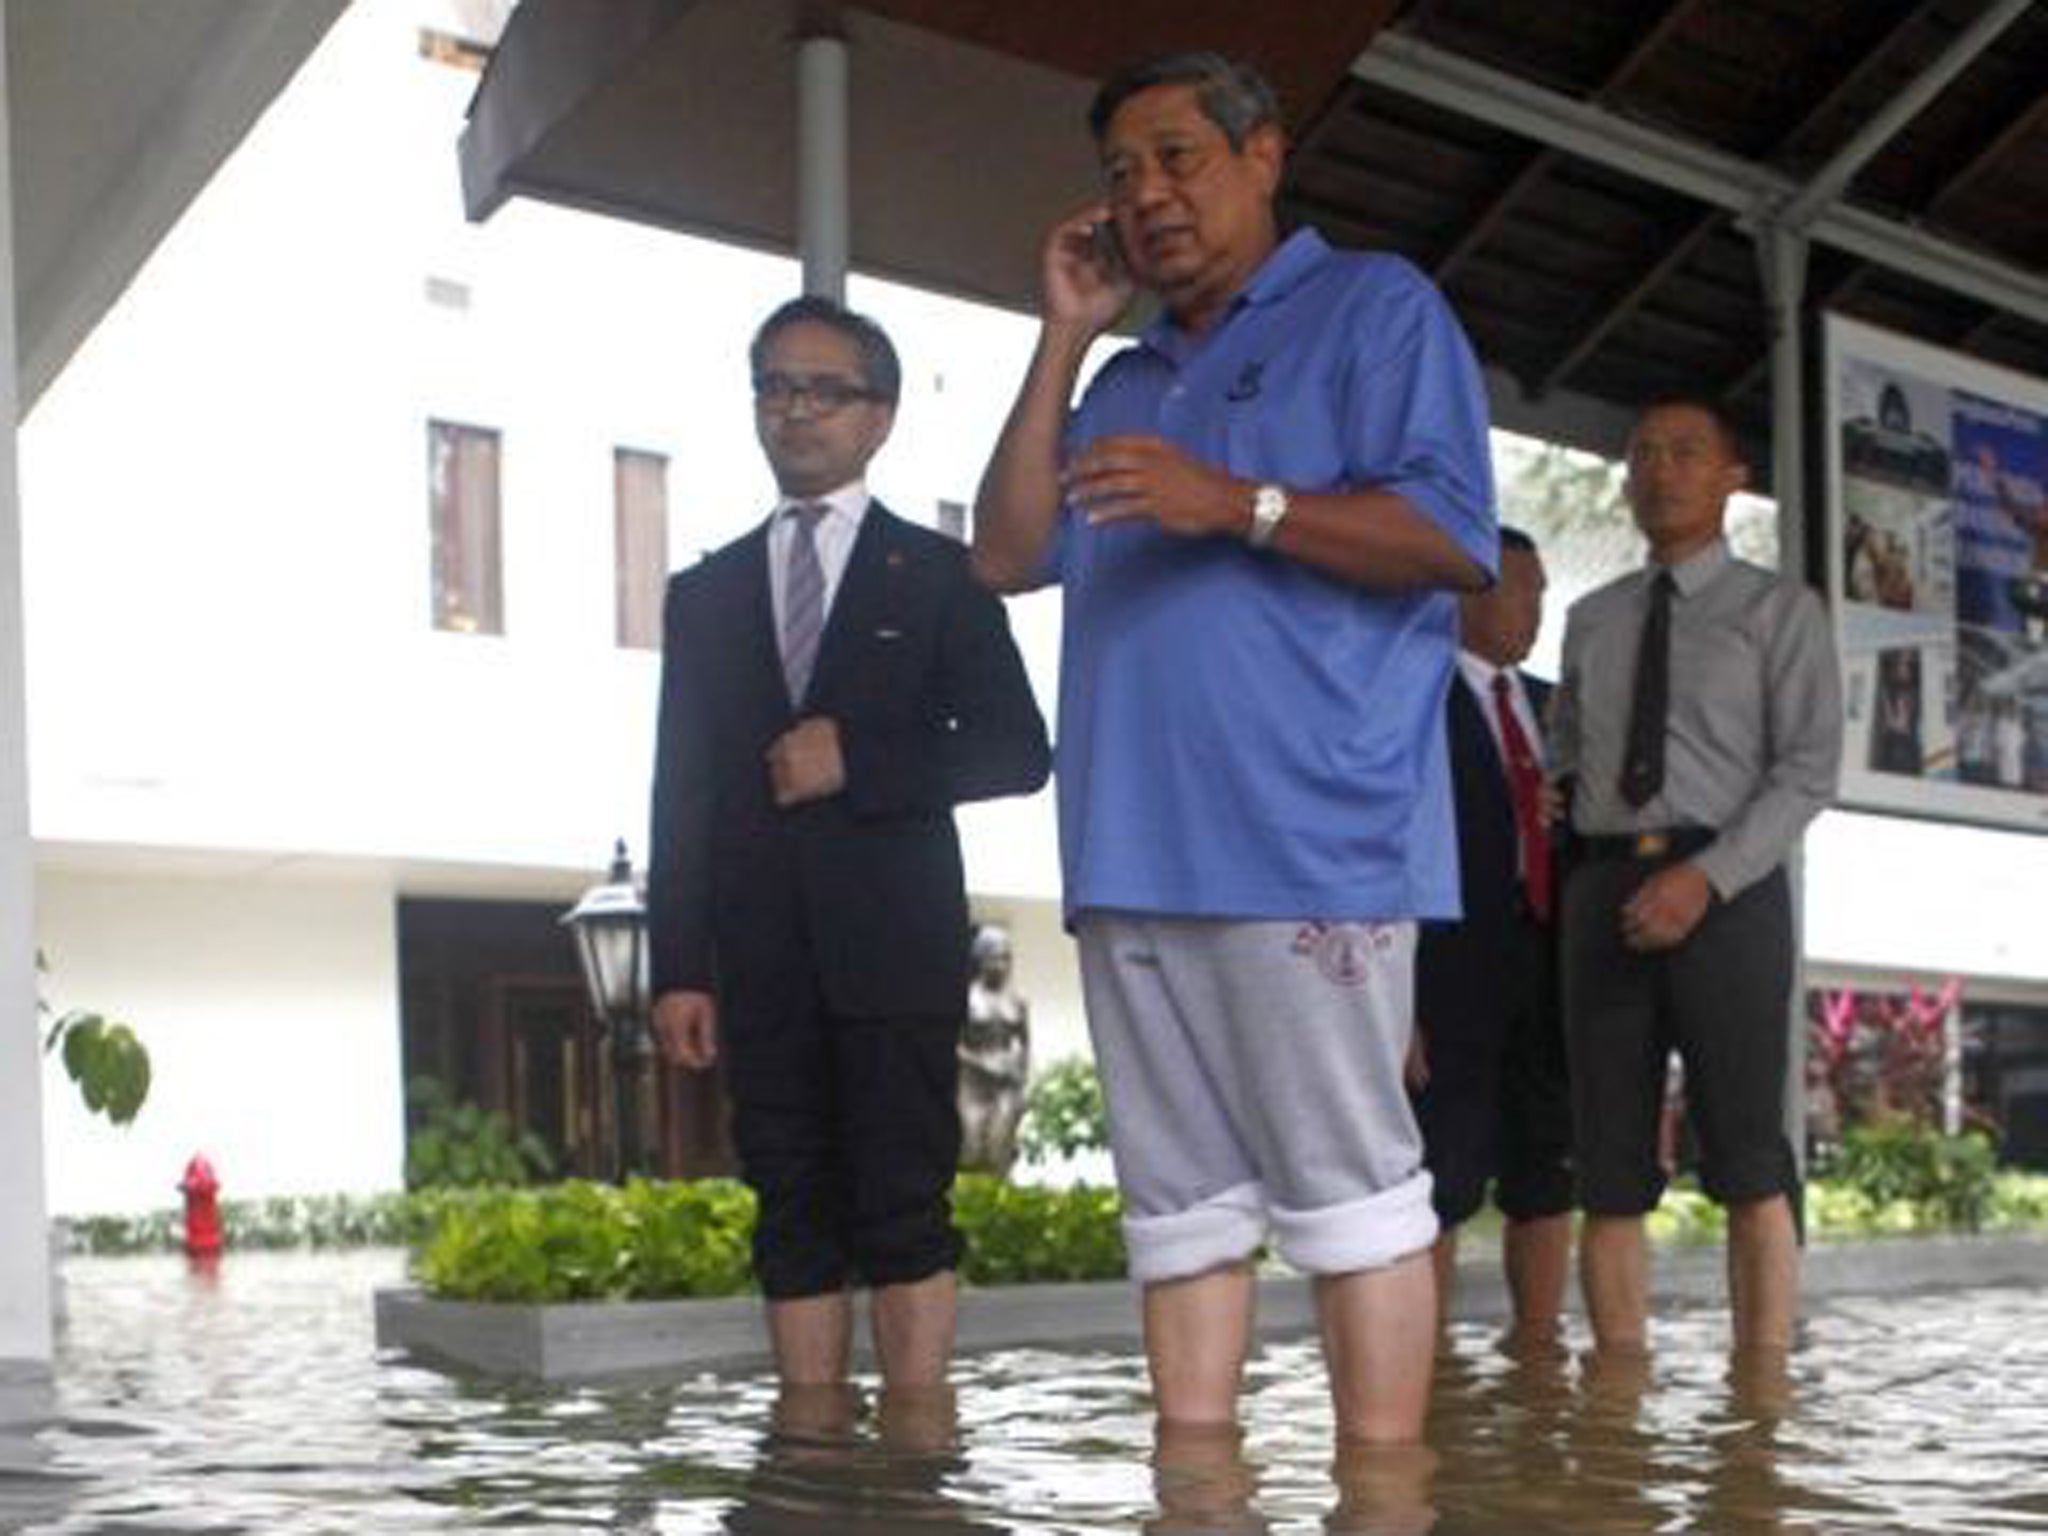 Indonesian president Susilo Bambang Yudhoyono, centre, inspects the flooded palace with foreign minister Marty Natalegawa, left, in Jakarta